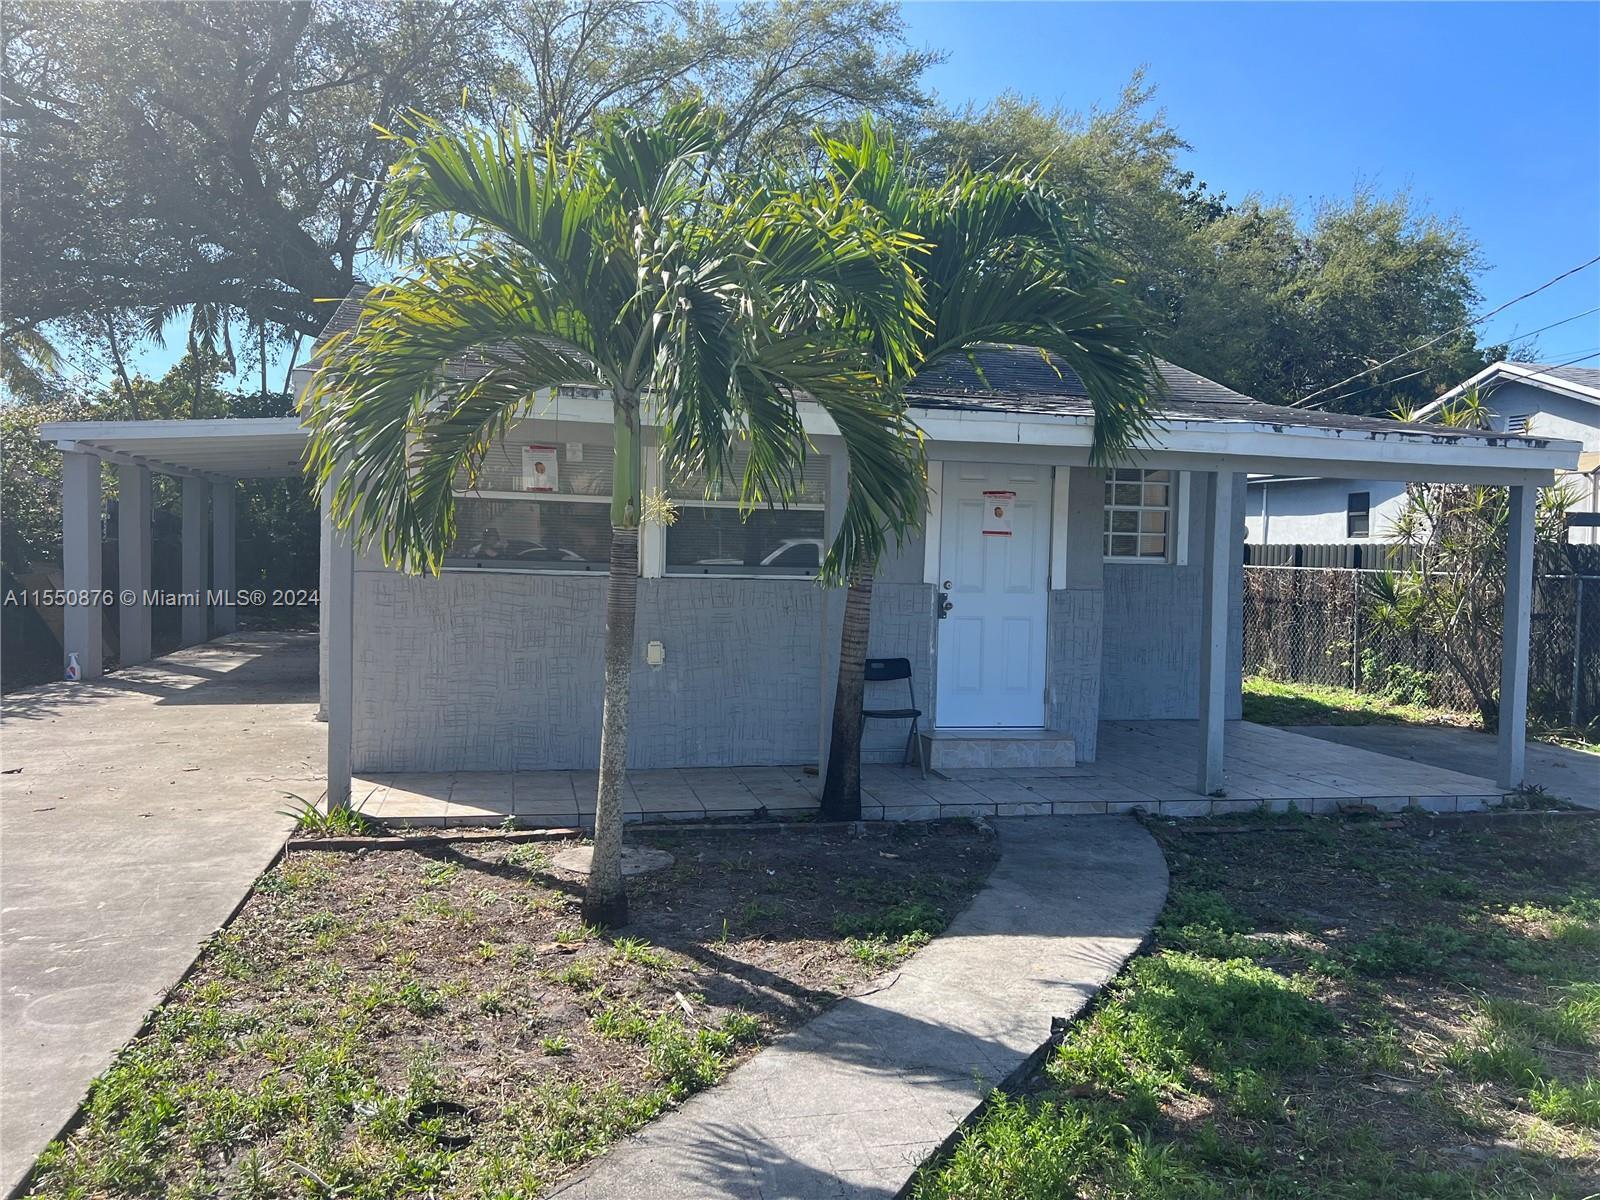 Photo of 412 NW 95th St in Miami, FL